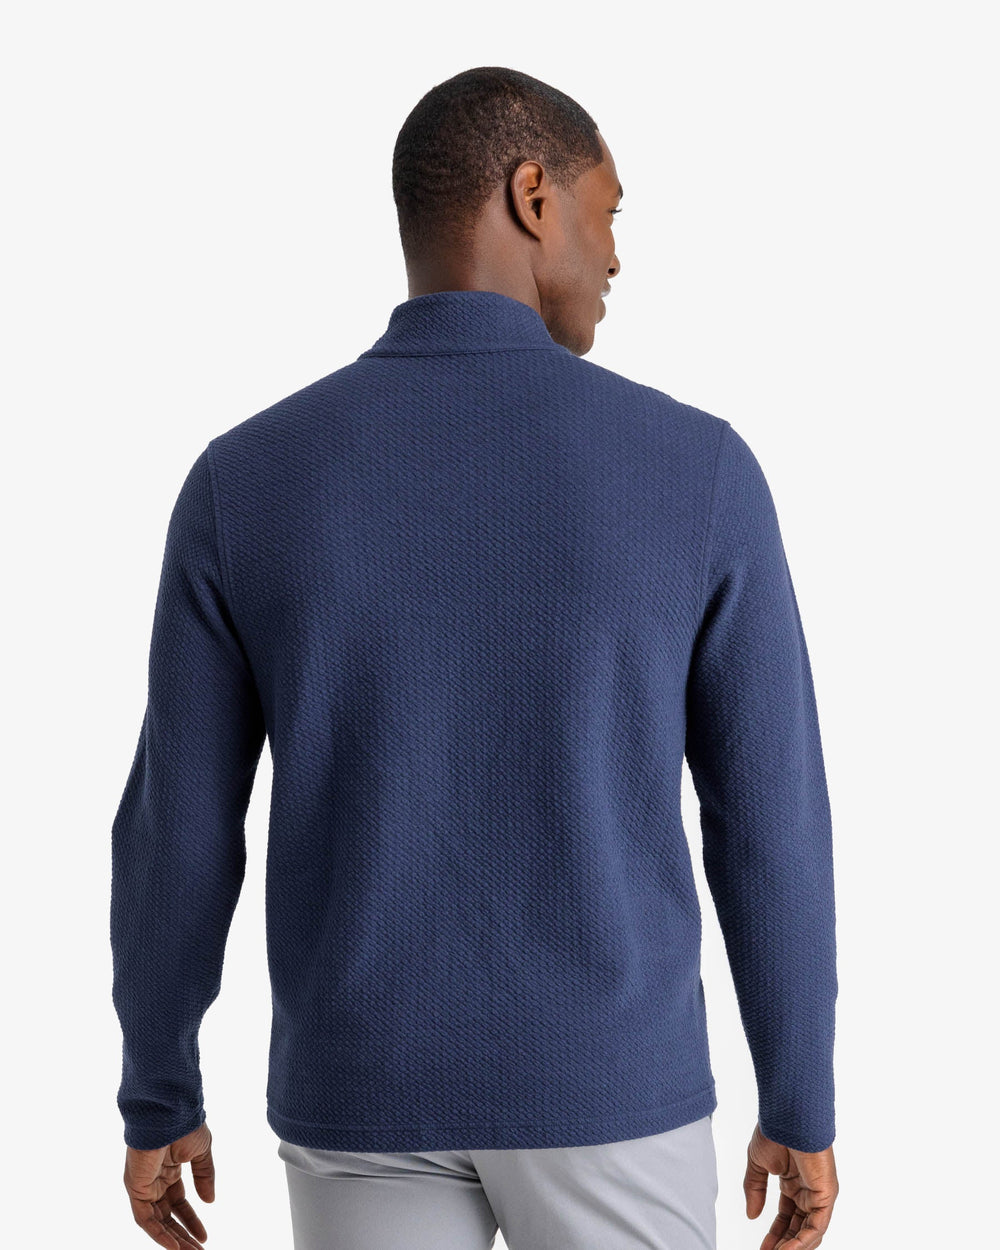 The back view of the Outbound Quarter Zip Pullover by Southern Tide - Heather True Navy